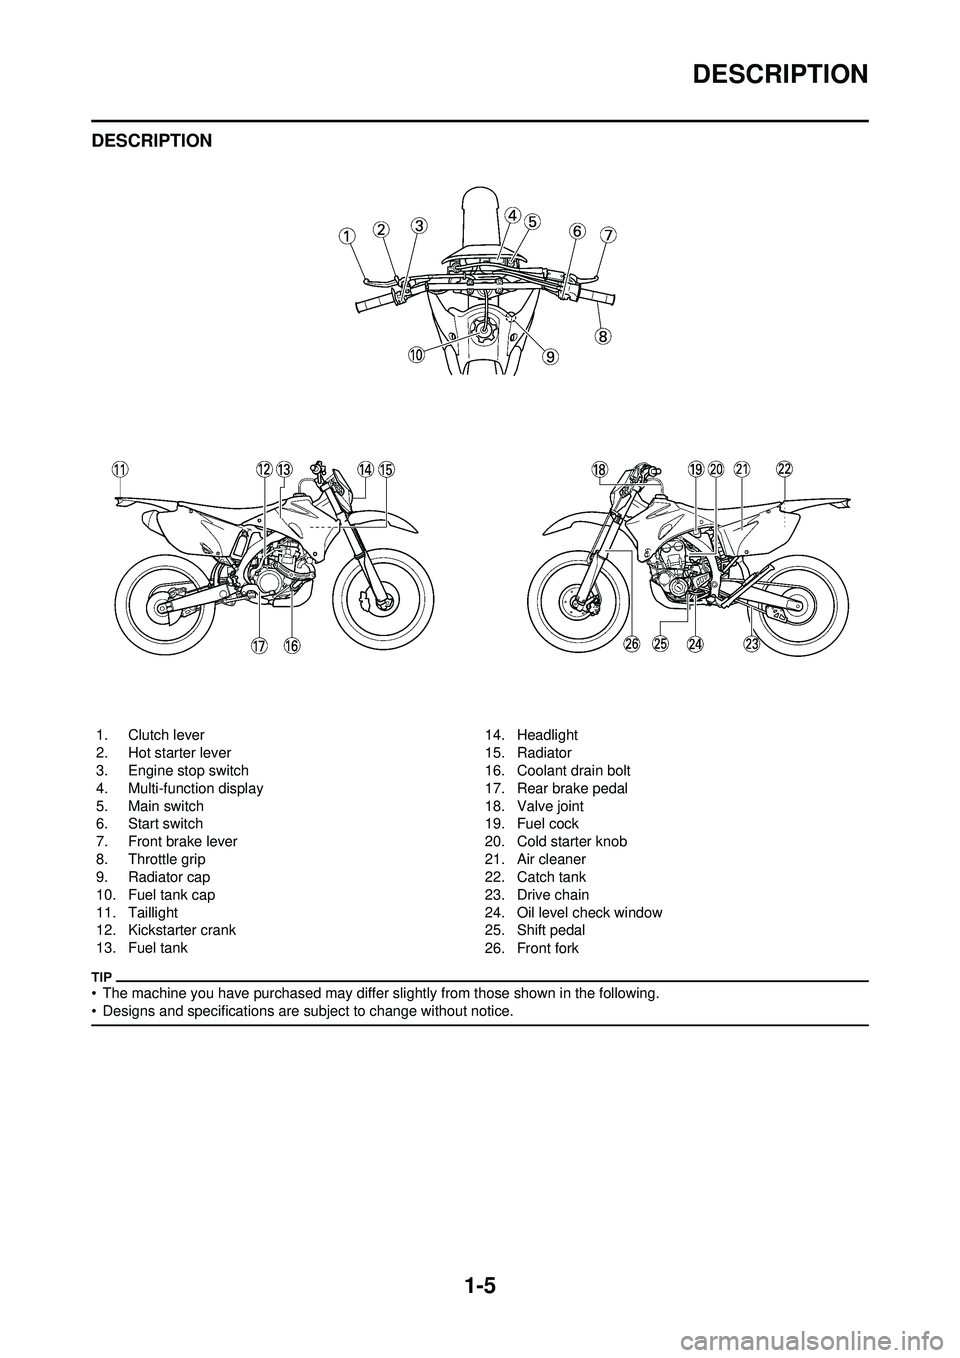 YAMAHA WR 250F 2010 User Guide 1-5
DESCRIPTION
DESCRIPTION
• The machine you have purchased may differ slightly from those shown in the following.
• Designs and specifications are subject to change without notice.
1. Clutch lev